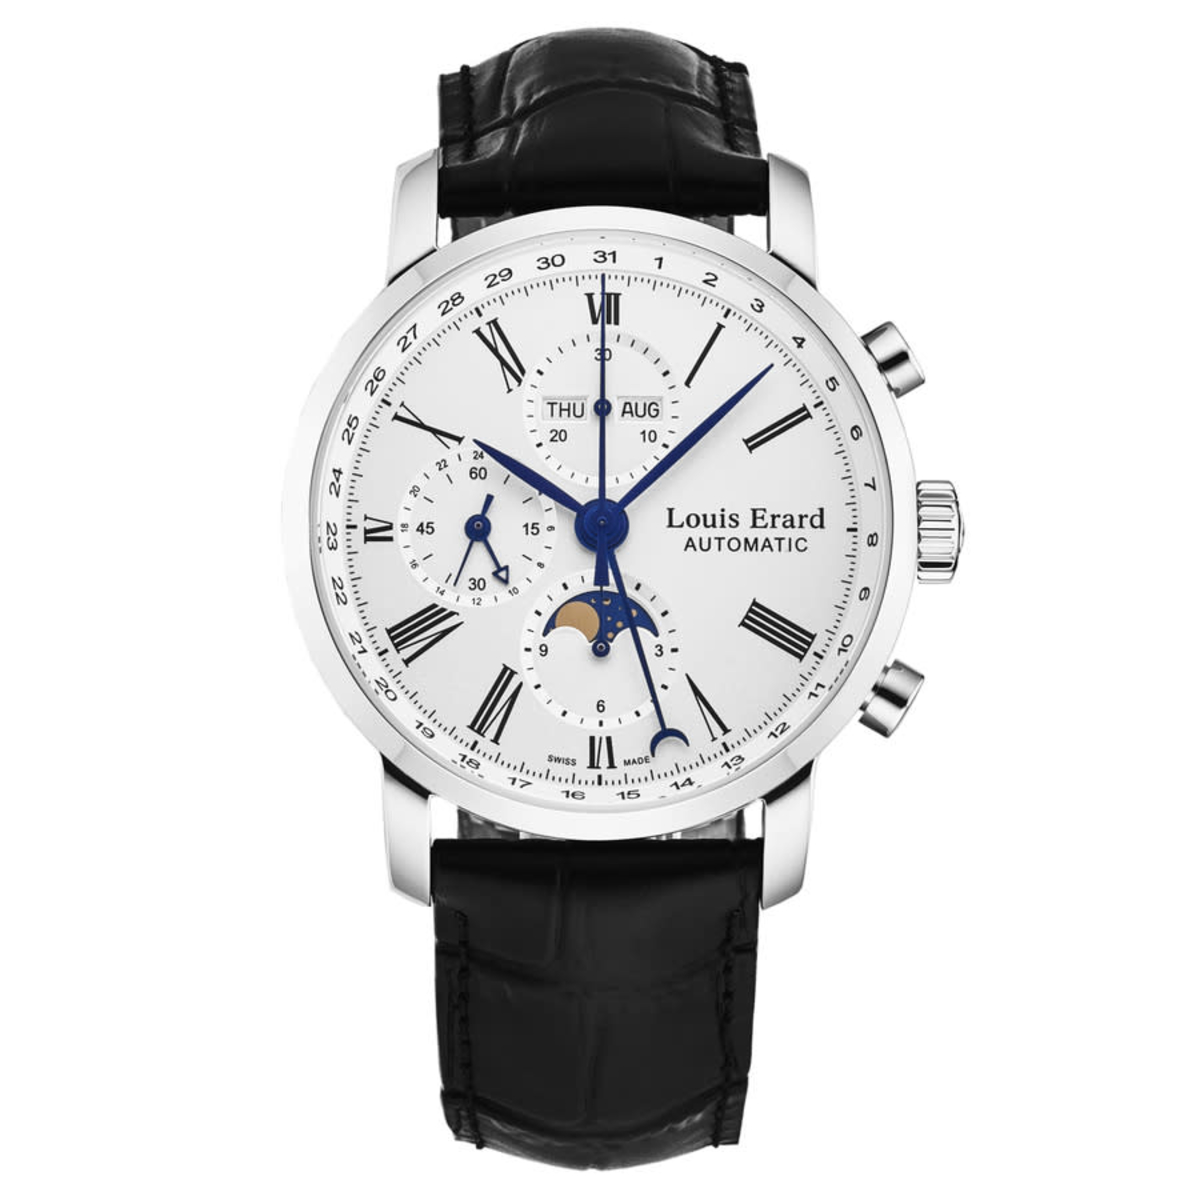 Louis Erard Watch Automatic Chronograph Day Date Swiss Made